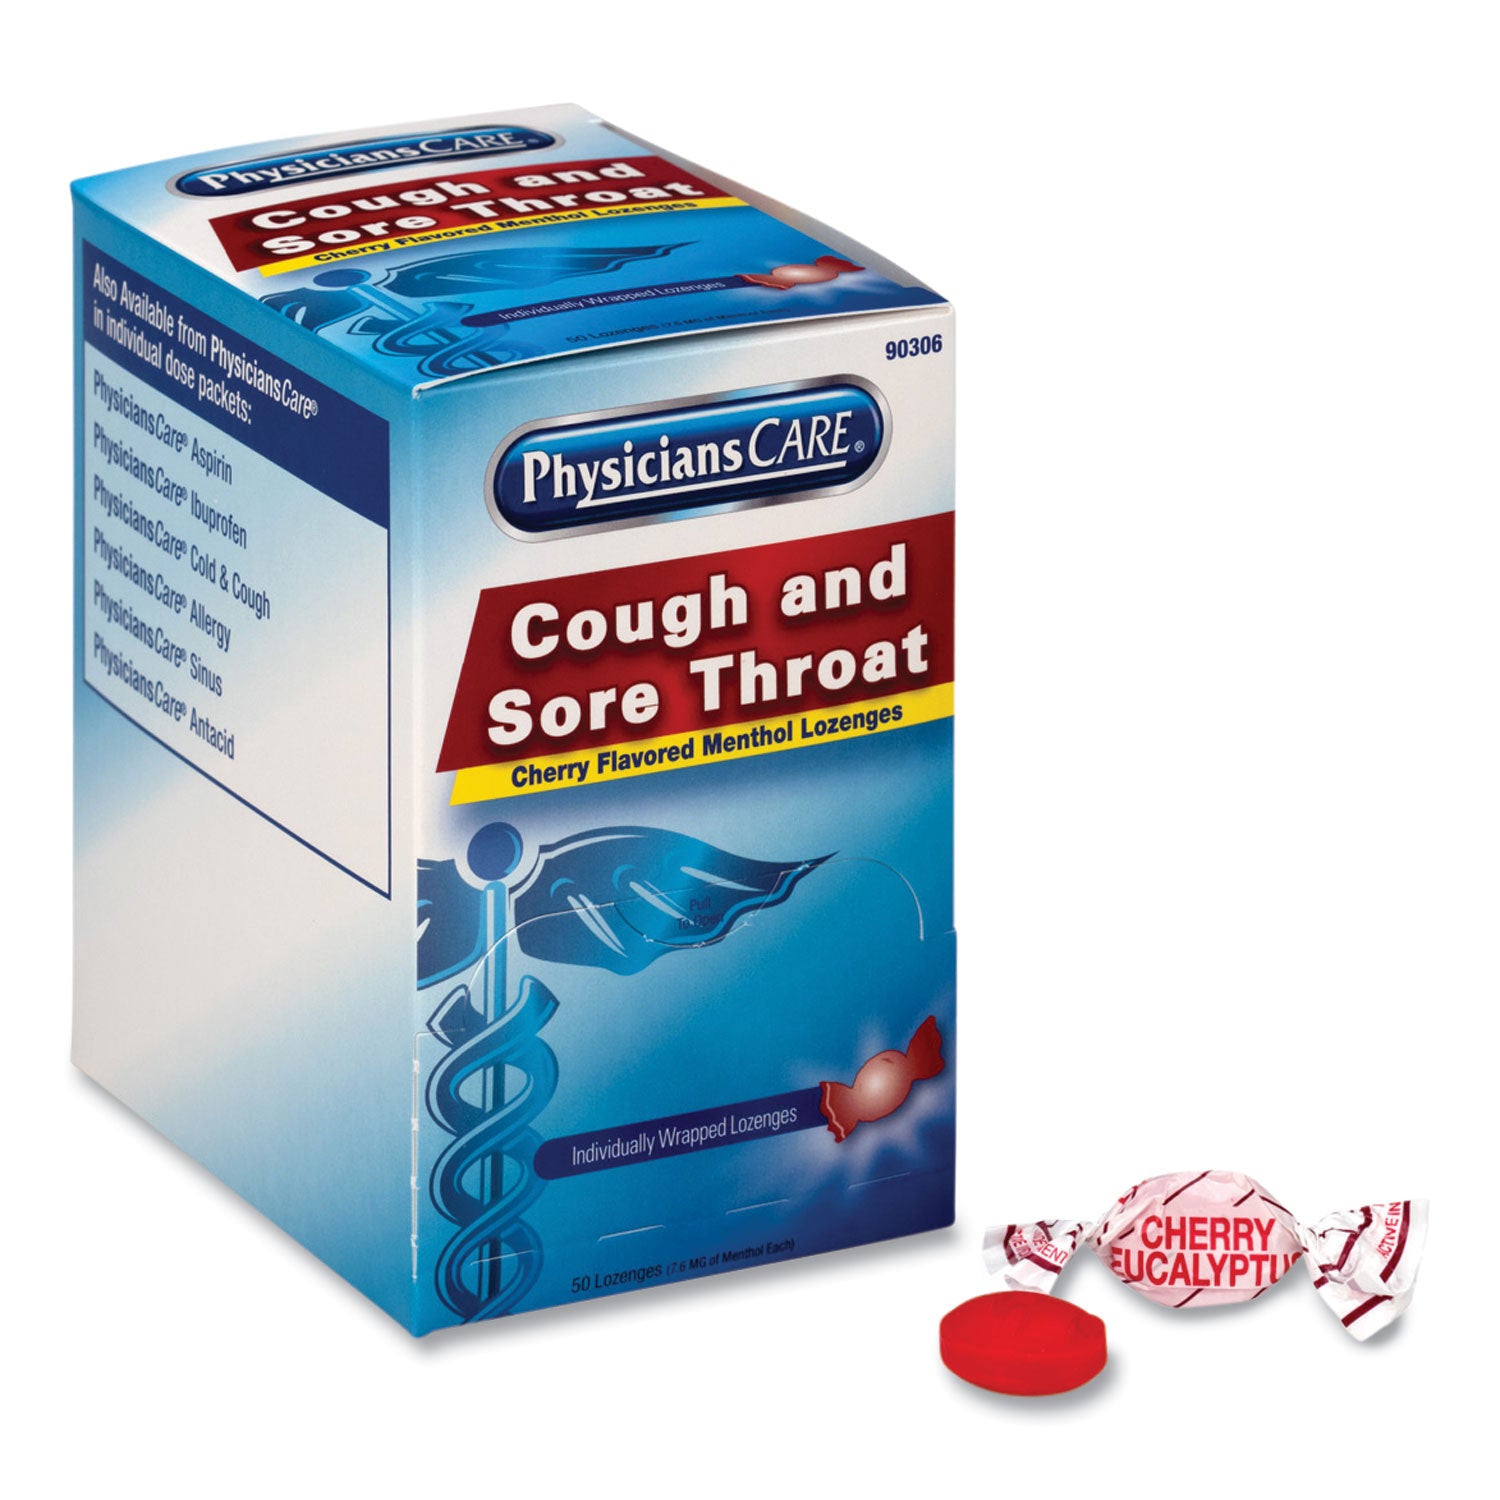 cough-and-sore-throat-cherry-menthol-lozenges-individually-wrapped-50-box_acm90306 - 2